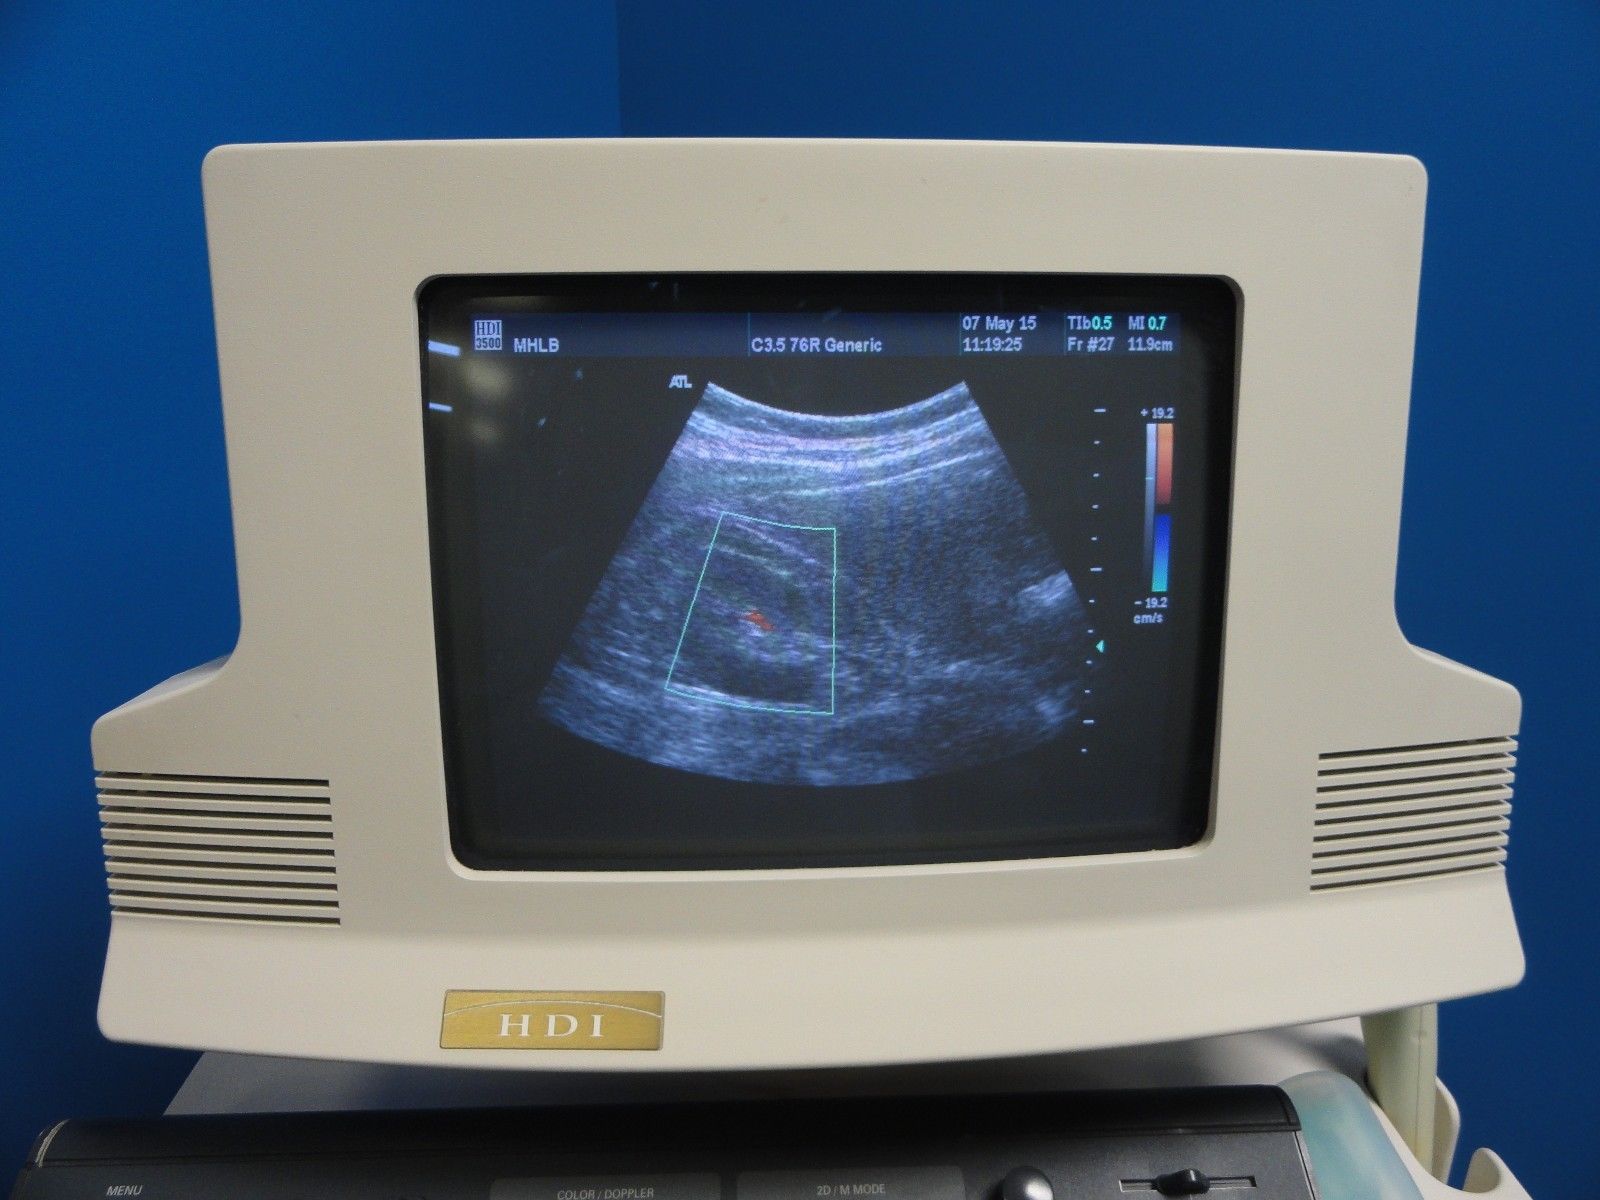 Philips ATL C3.5 76R  Convex / Curved Array Ultrasound Transducer Probe (8837) DIAGNOSTIC ULTRASOUND MACHINES FOR SALE